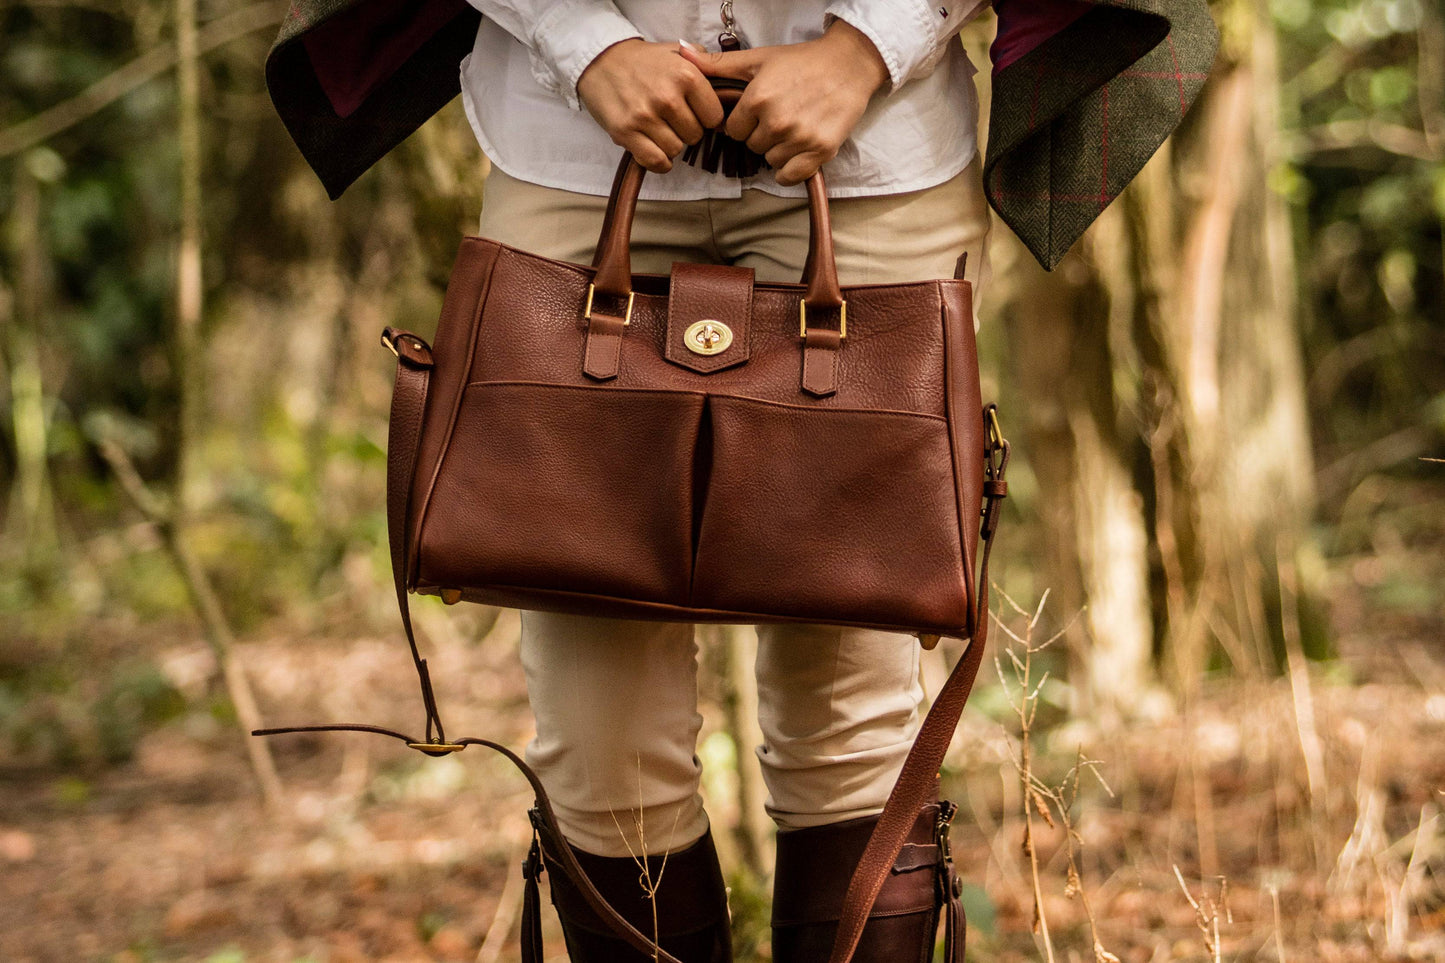 Cadogan Tote Bag in Chestnut Tan Leather by Woodcock & Cavendish for sale - Woodcock and Cavendish